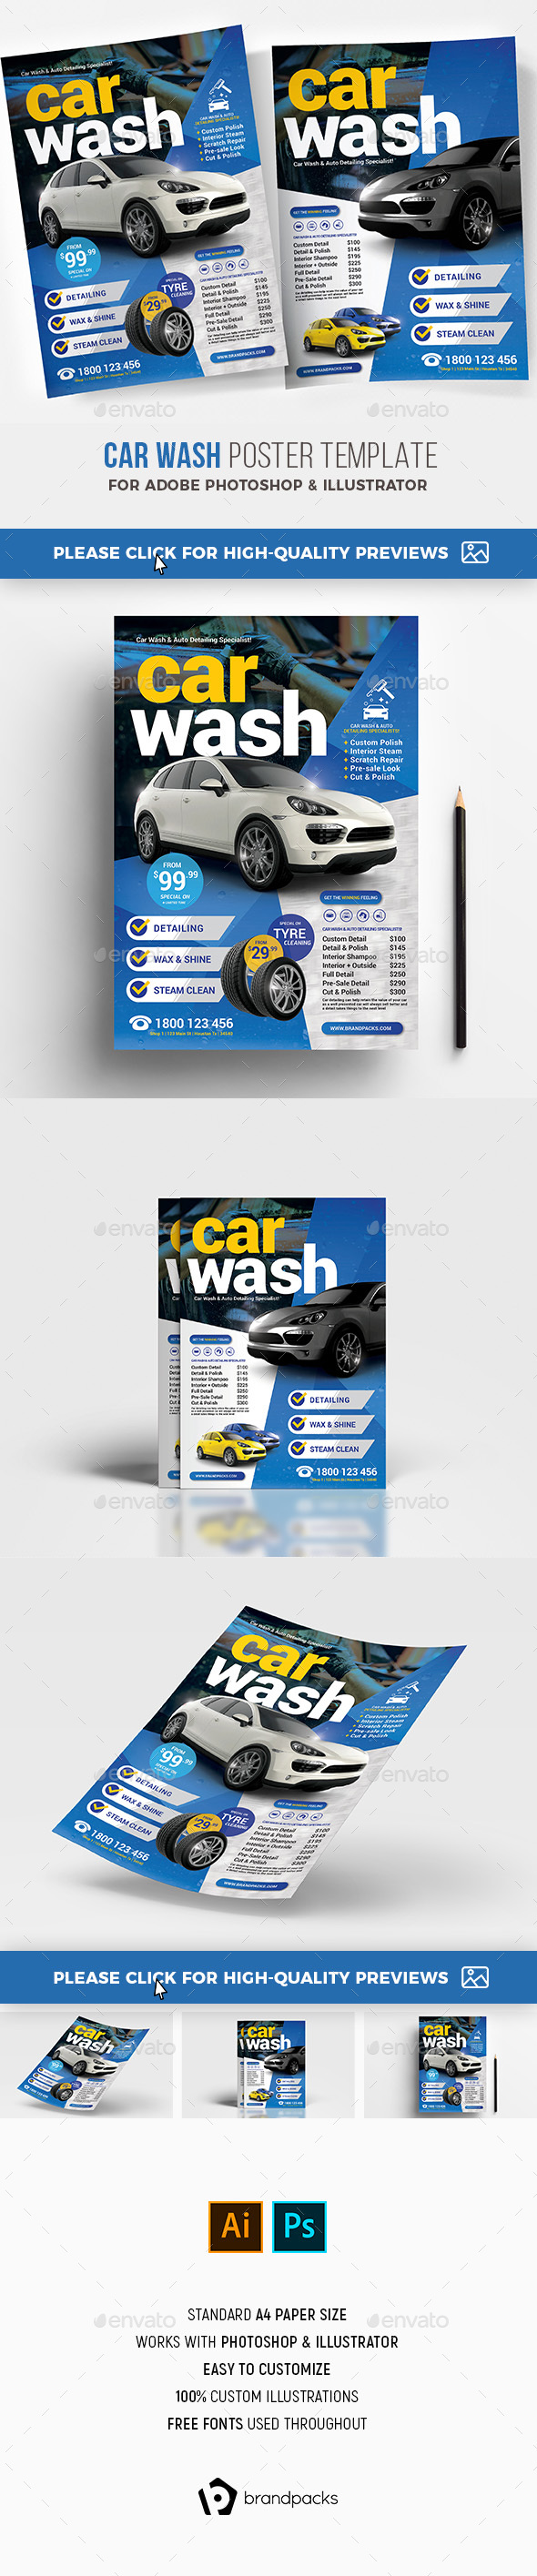 Car Wash Poster / Flyer Template